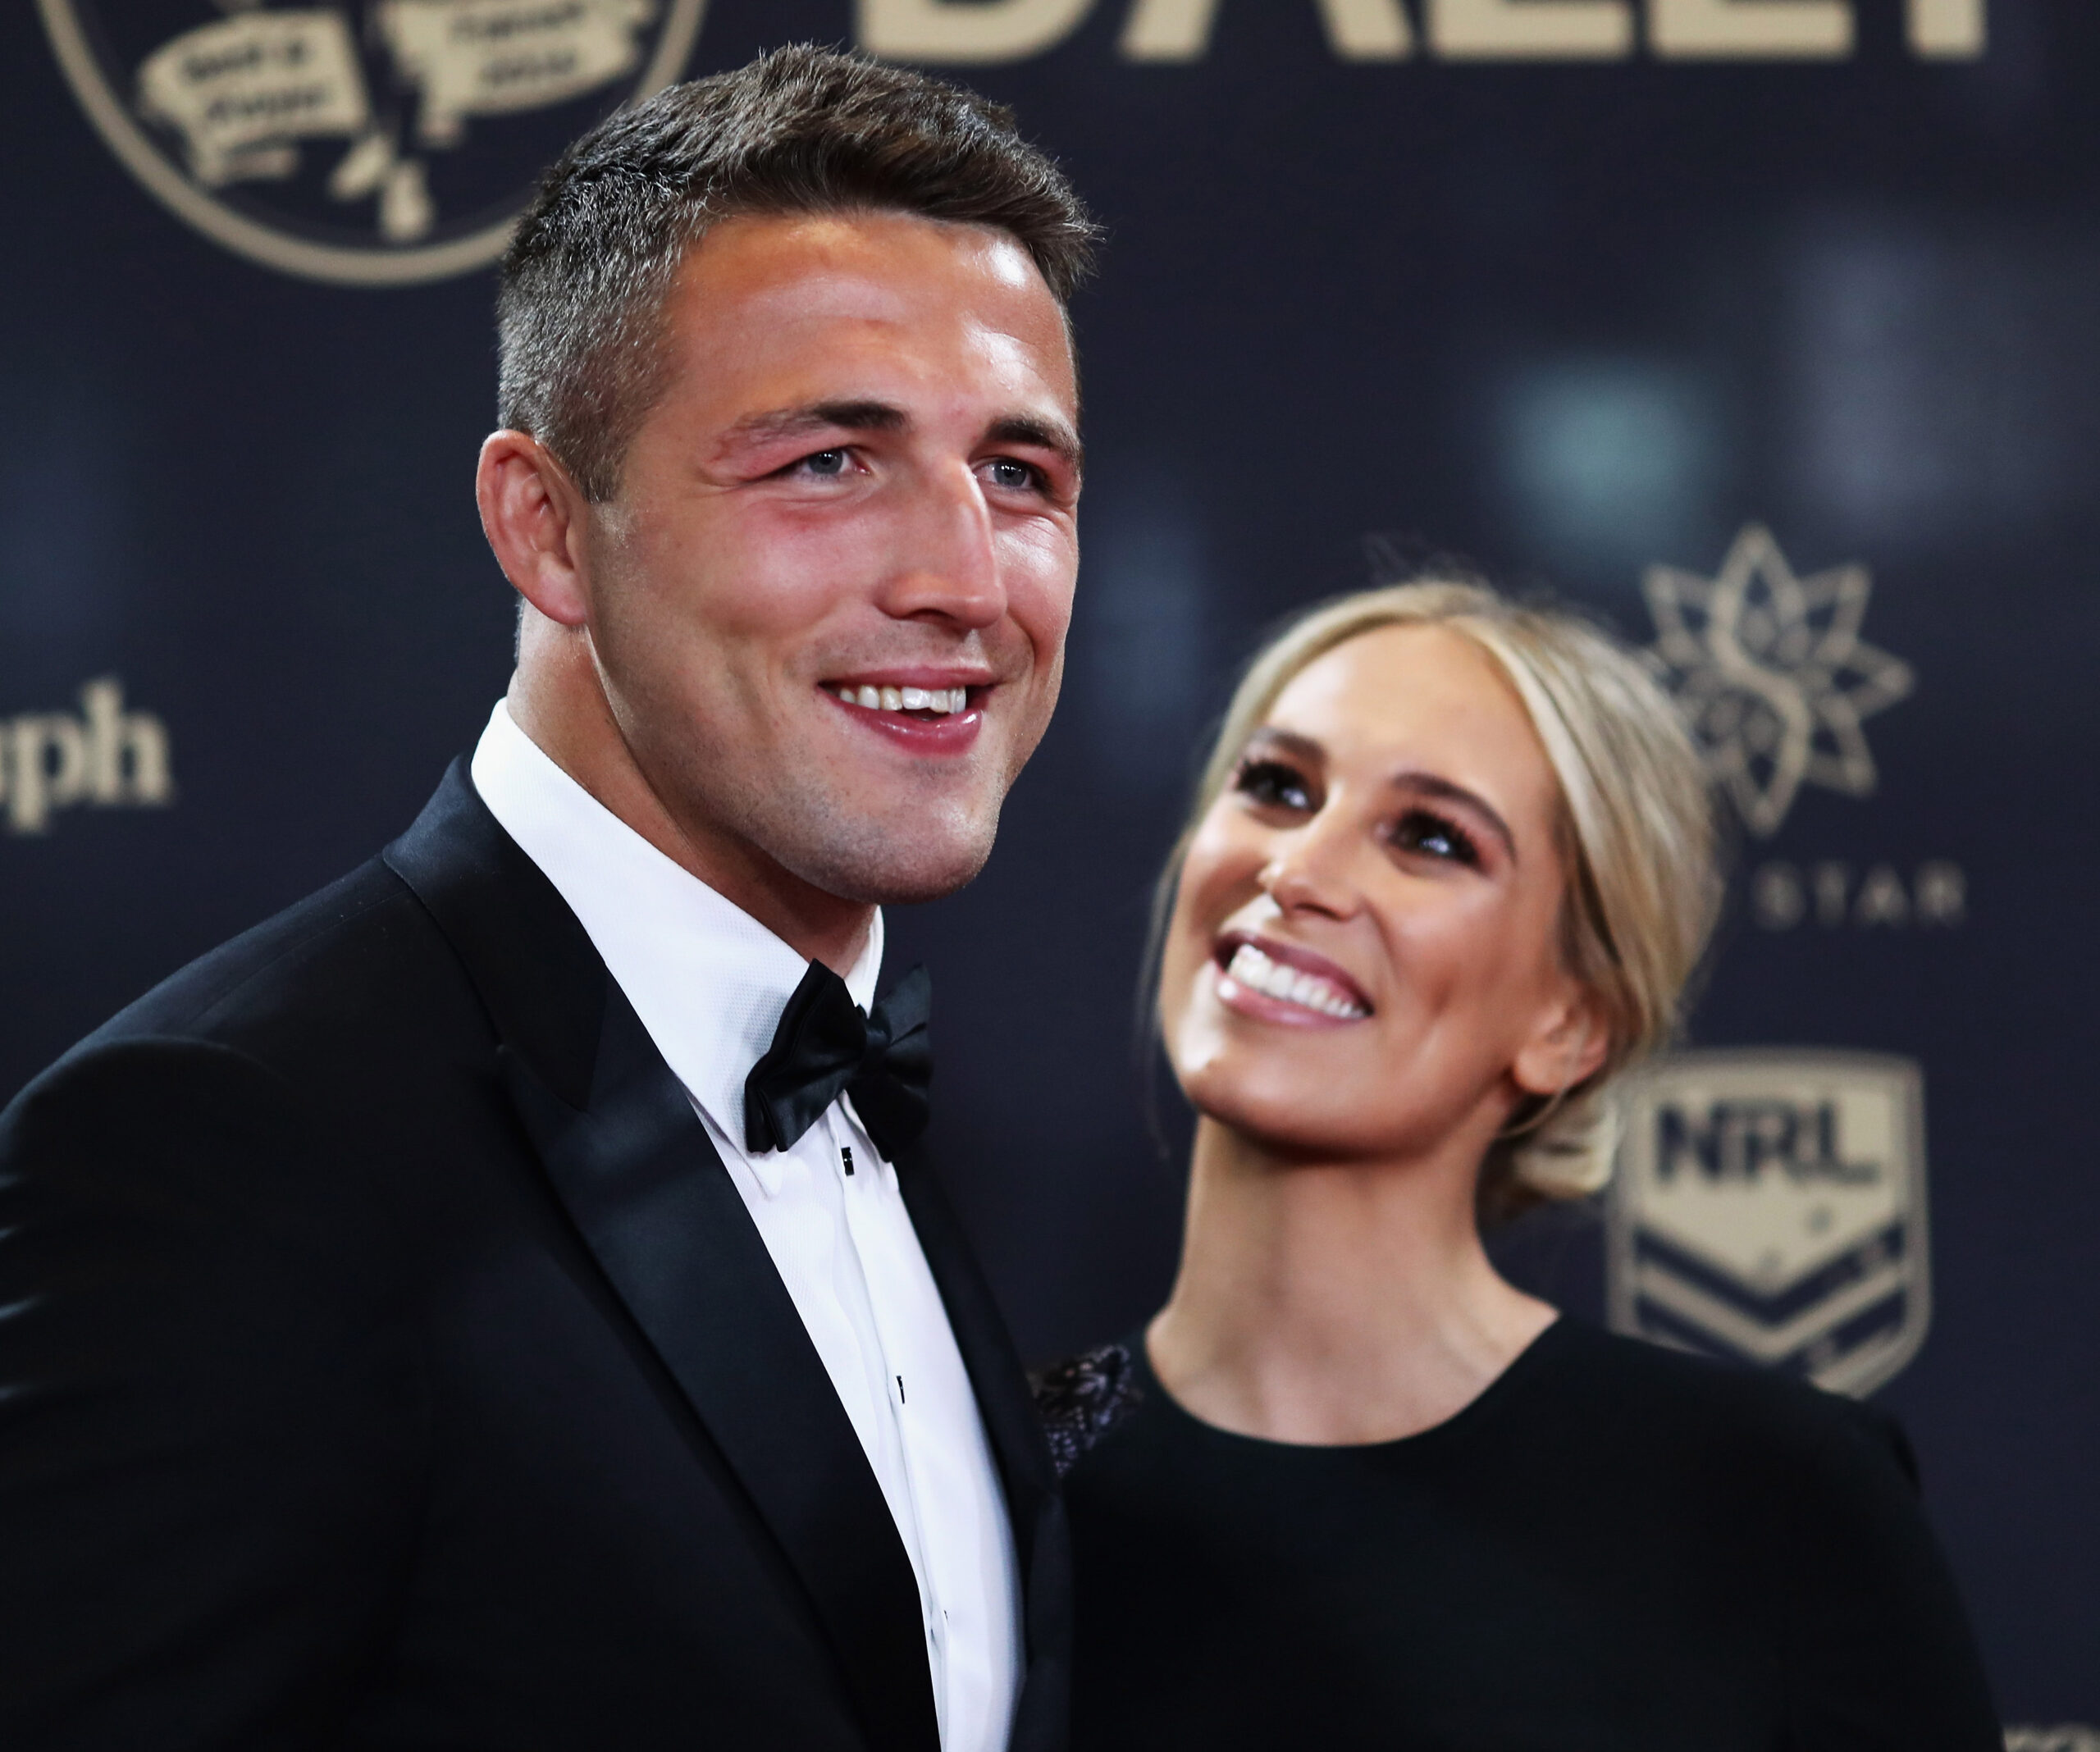 Sam Burgess and Phoebe Burgess split less than a month after the birth of their son